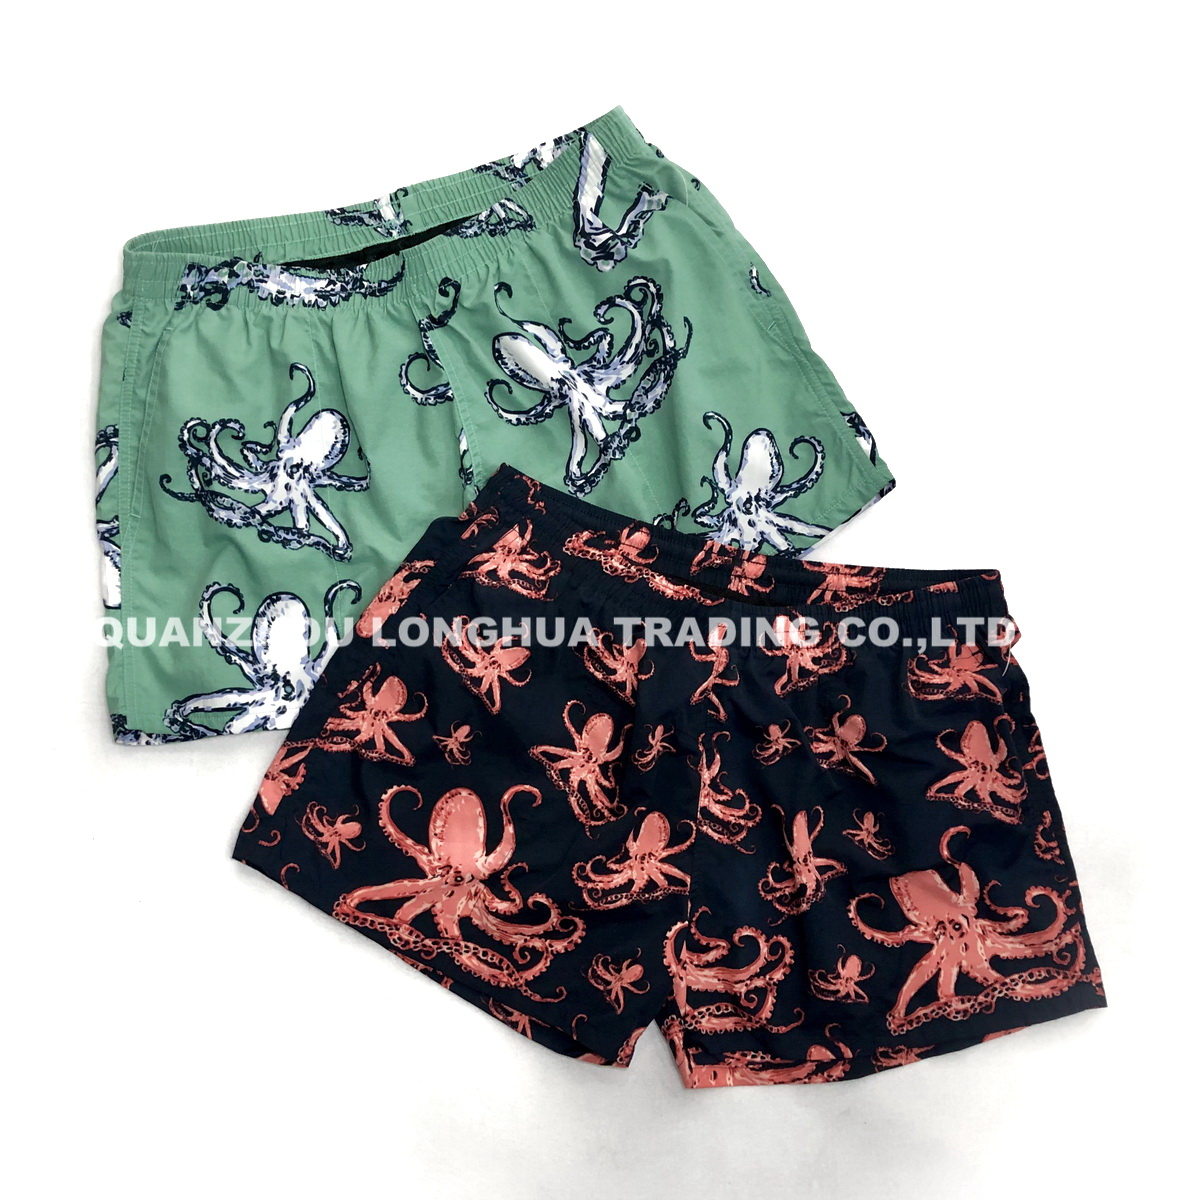 Men and Boys Nylon Swimming Wear Beach Shorts Board Shorts with Octopuses Printing Apparel Trousers Kids Swim Wear Pants